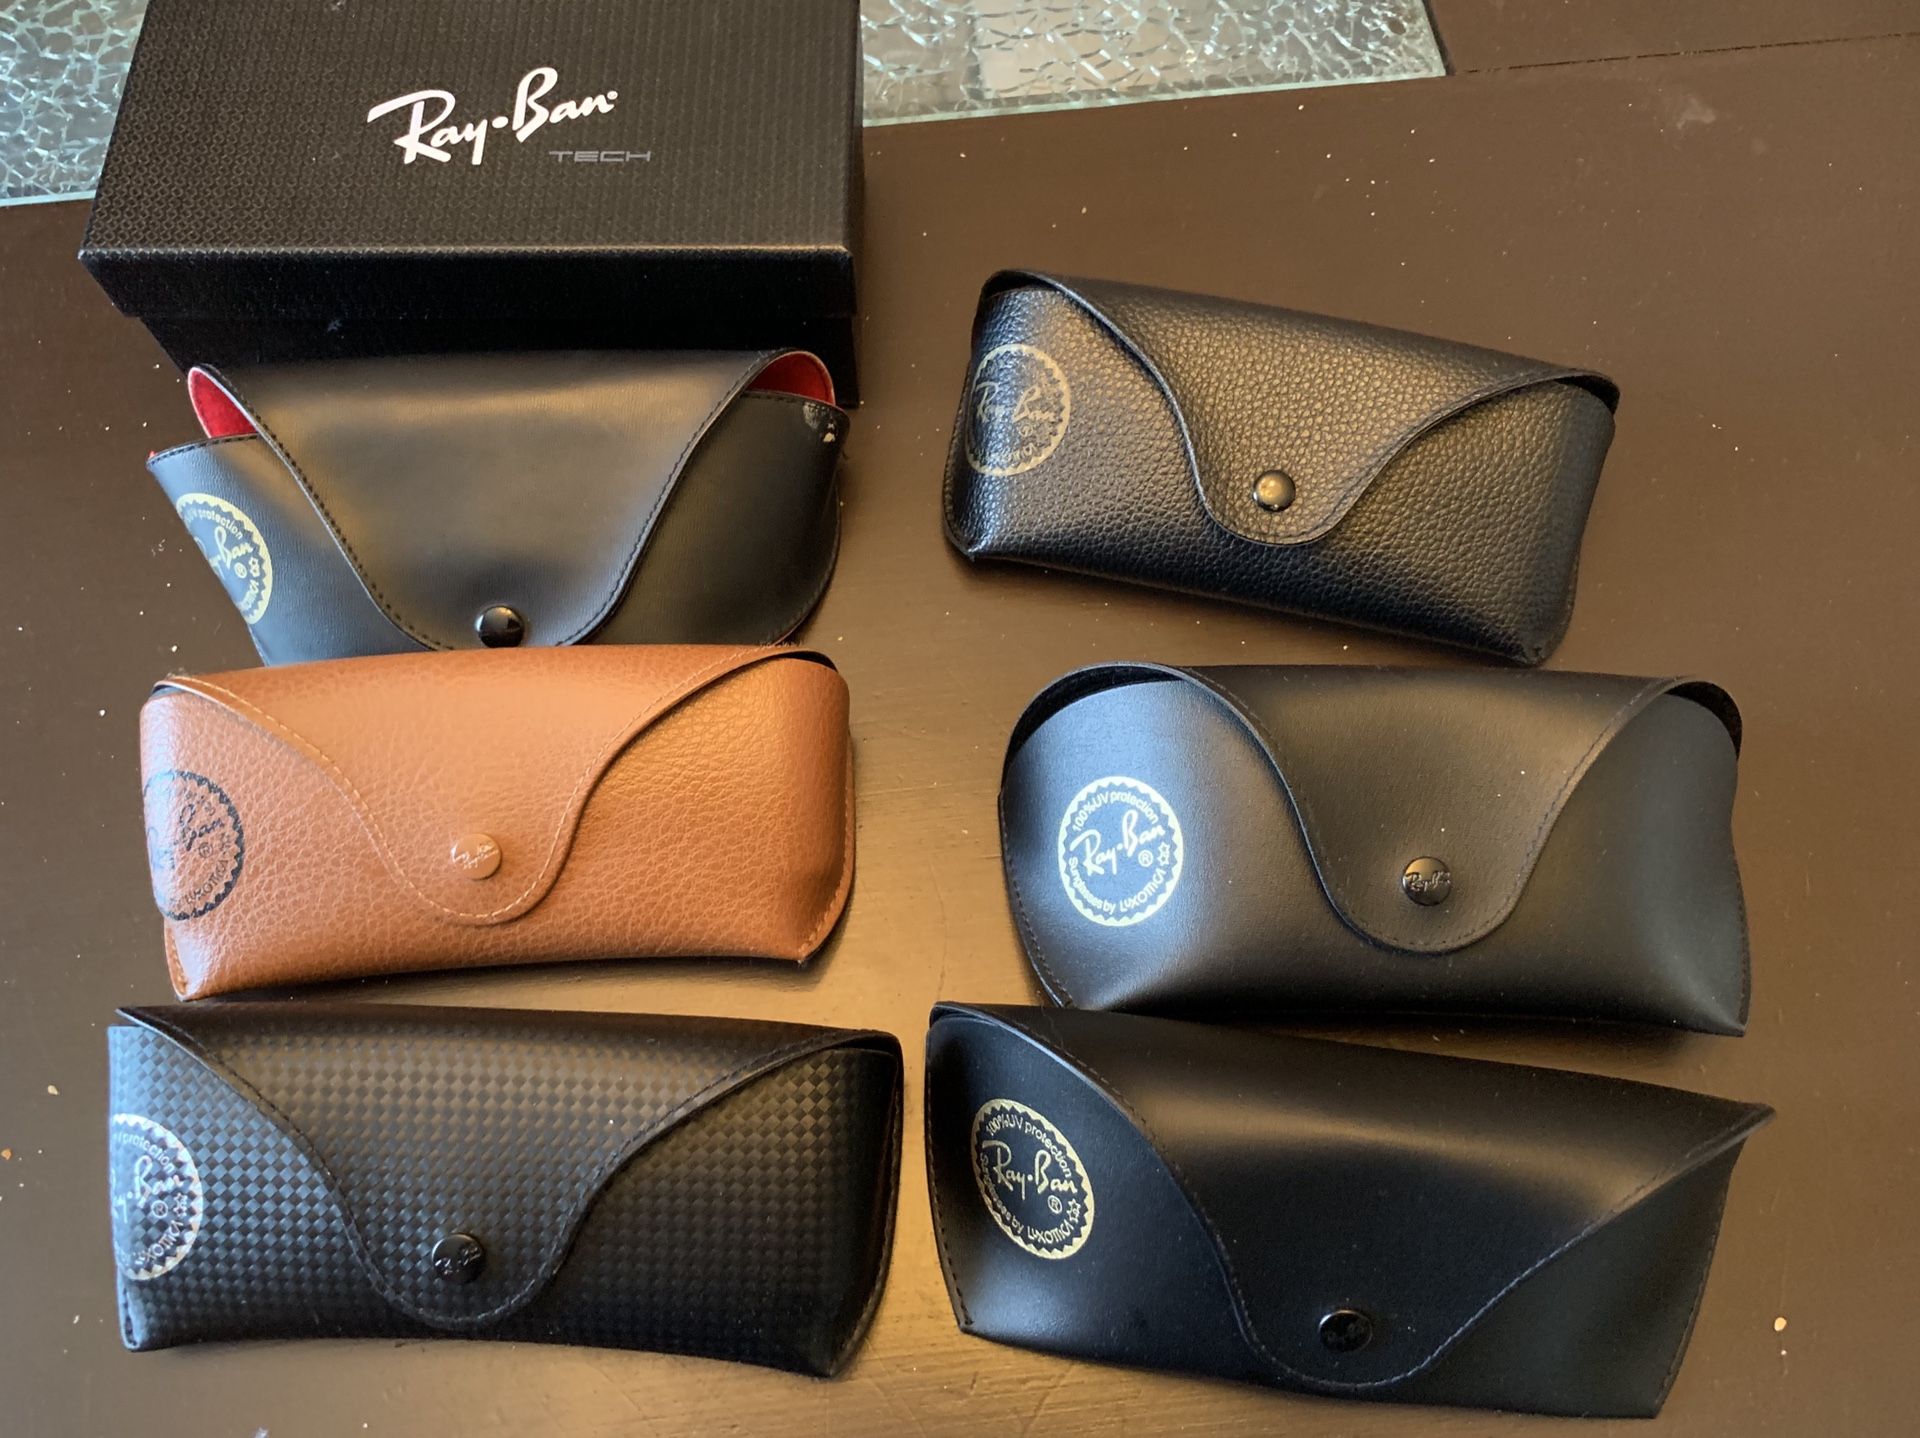 6 Authentic leather RayBan cases, 3 cleaning cloth, 1 box